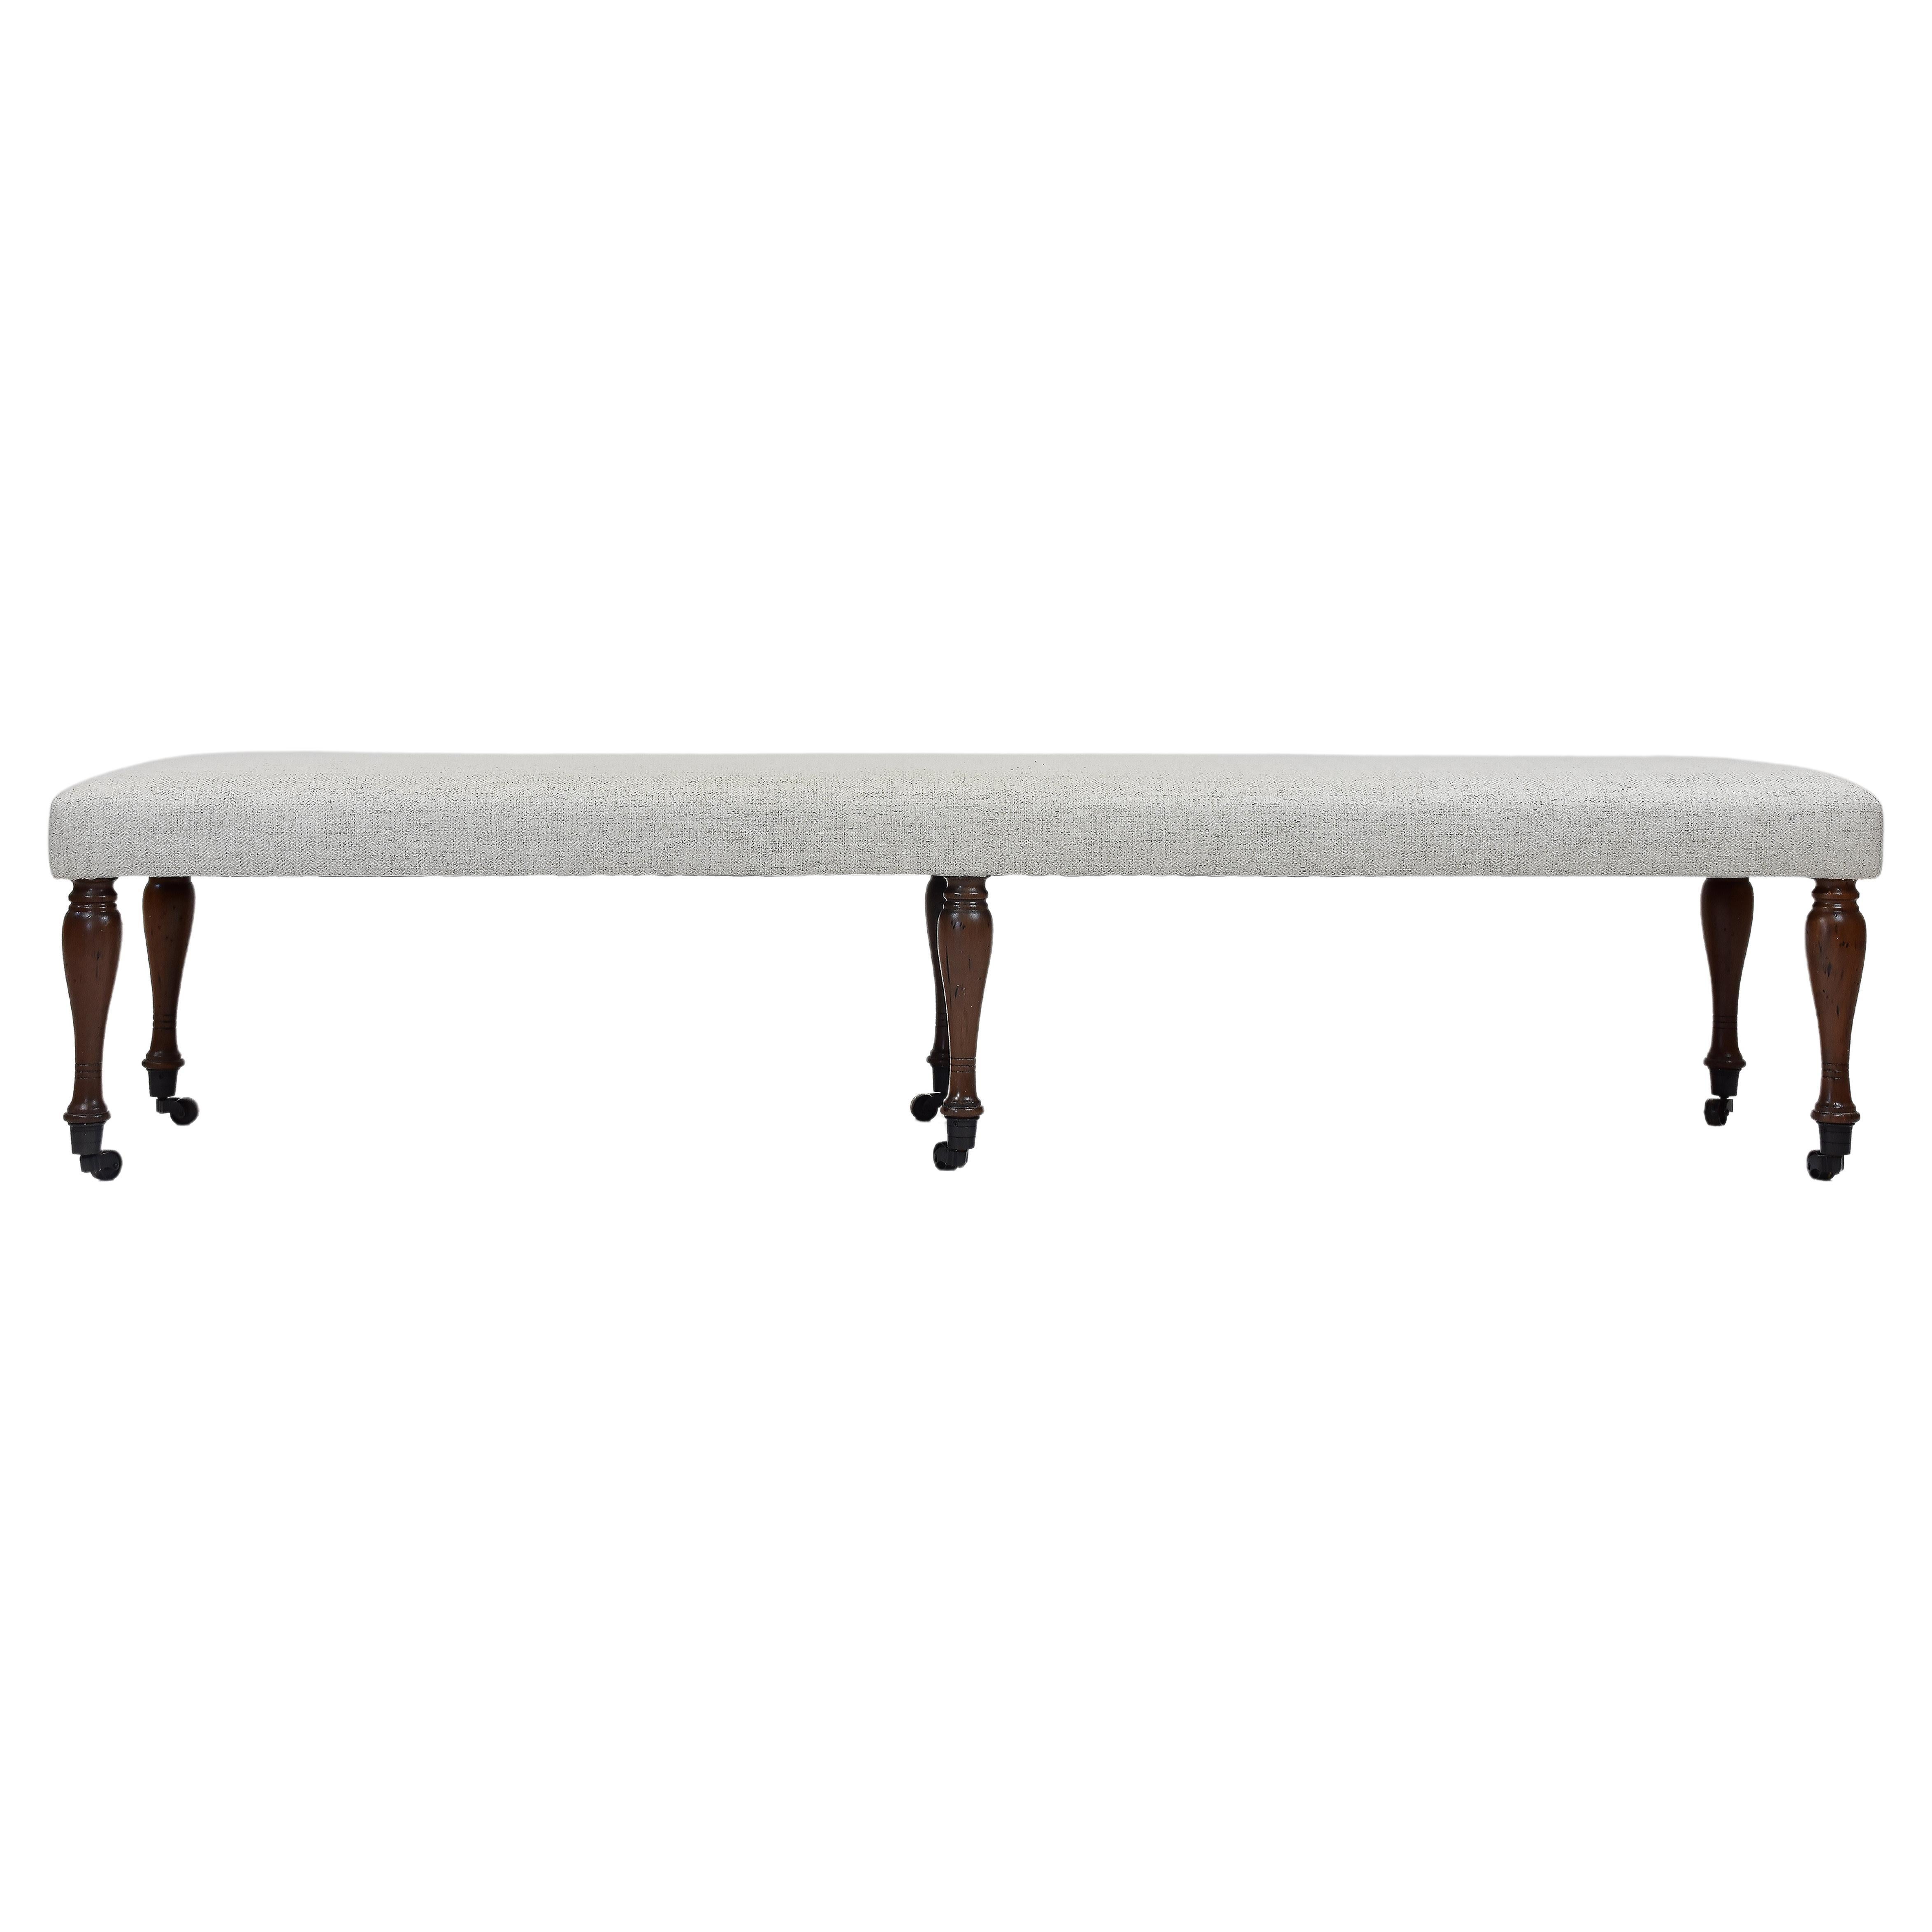 Le Jeune Upholstery Antoinette Long Bench Floor Model with Casters For Sale